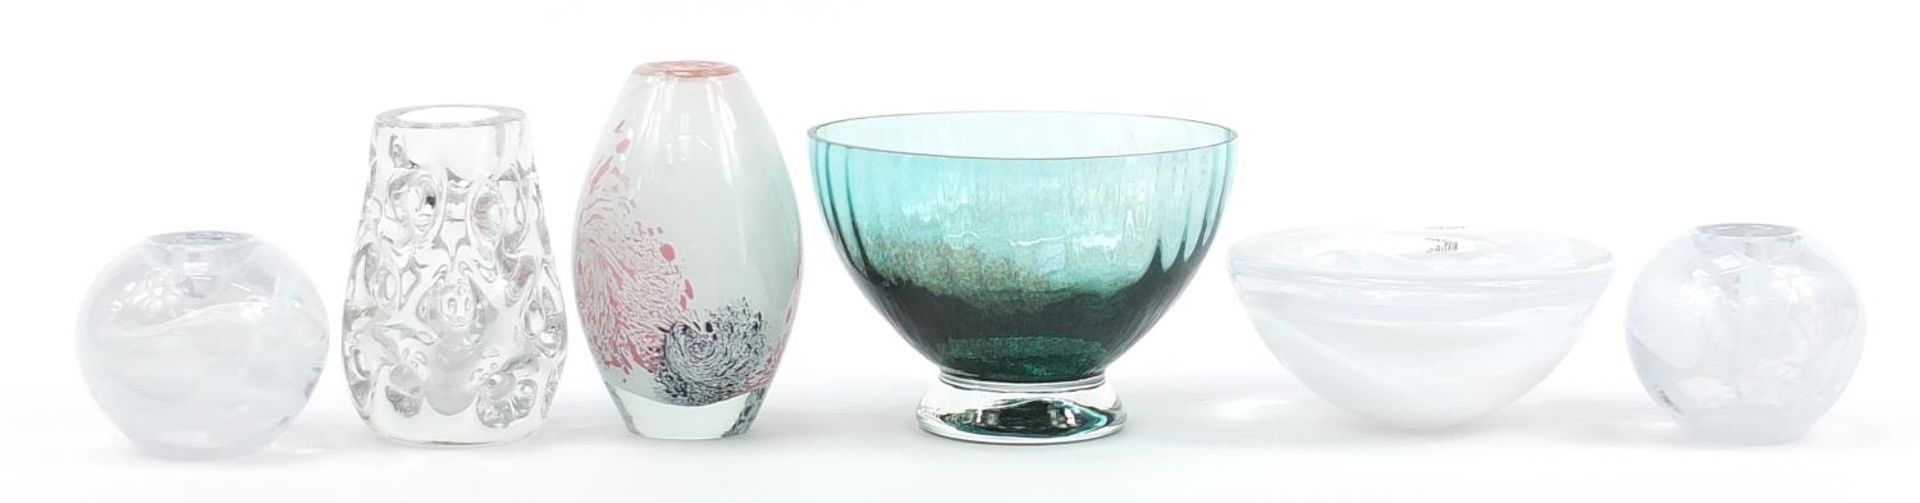 Art glassware including a pair of Kosta Boda candleholders, Mdina vase and large Caithness bowl, the